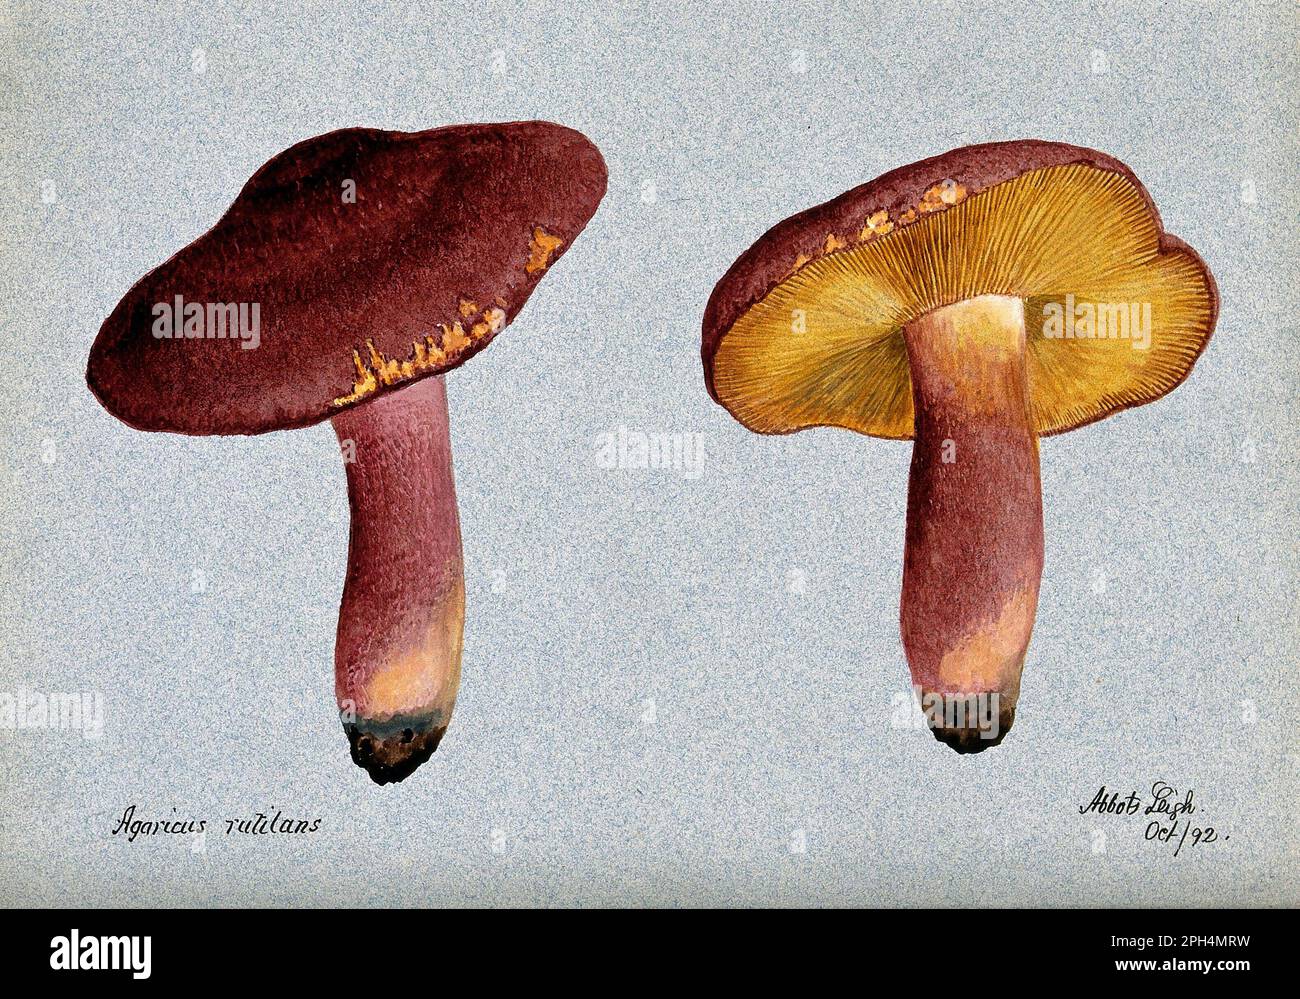 Tricholomopsis rutilans, commonly known as Plums and Custard or Red-haired agaric, is a species of gilled mushroom, vintage watercolour from 1892 Stock Photo